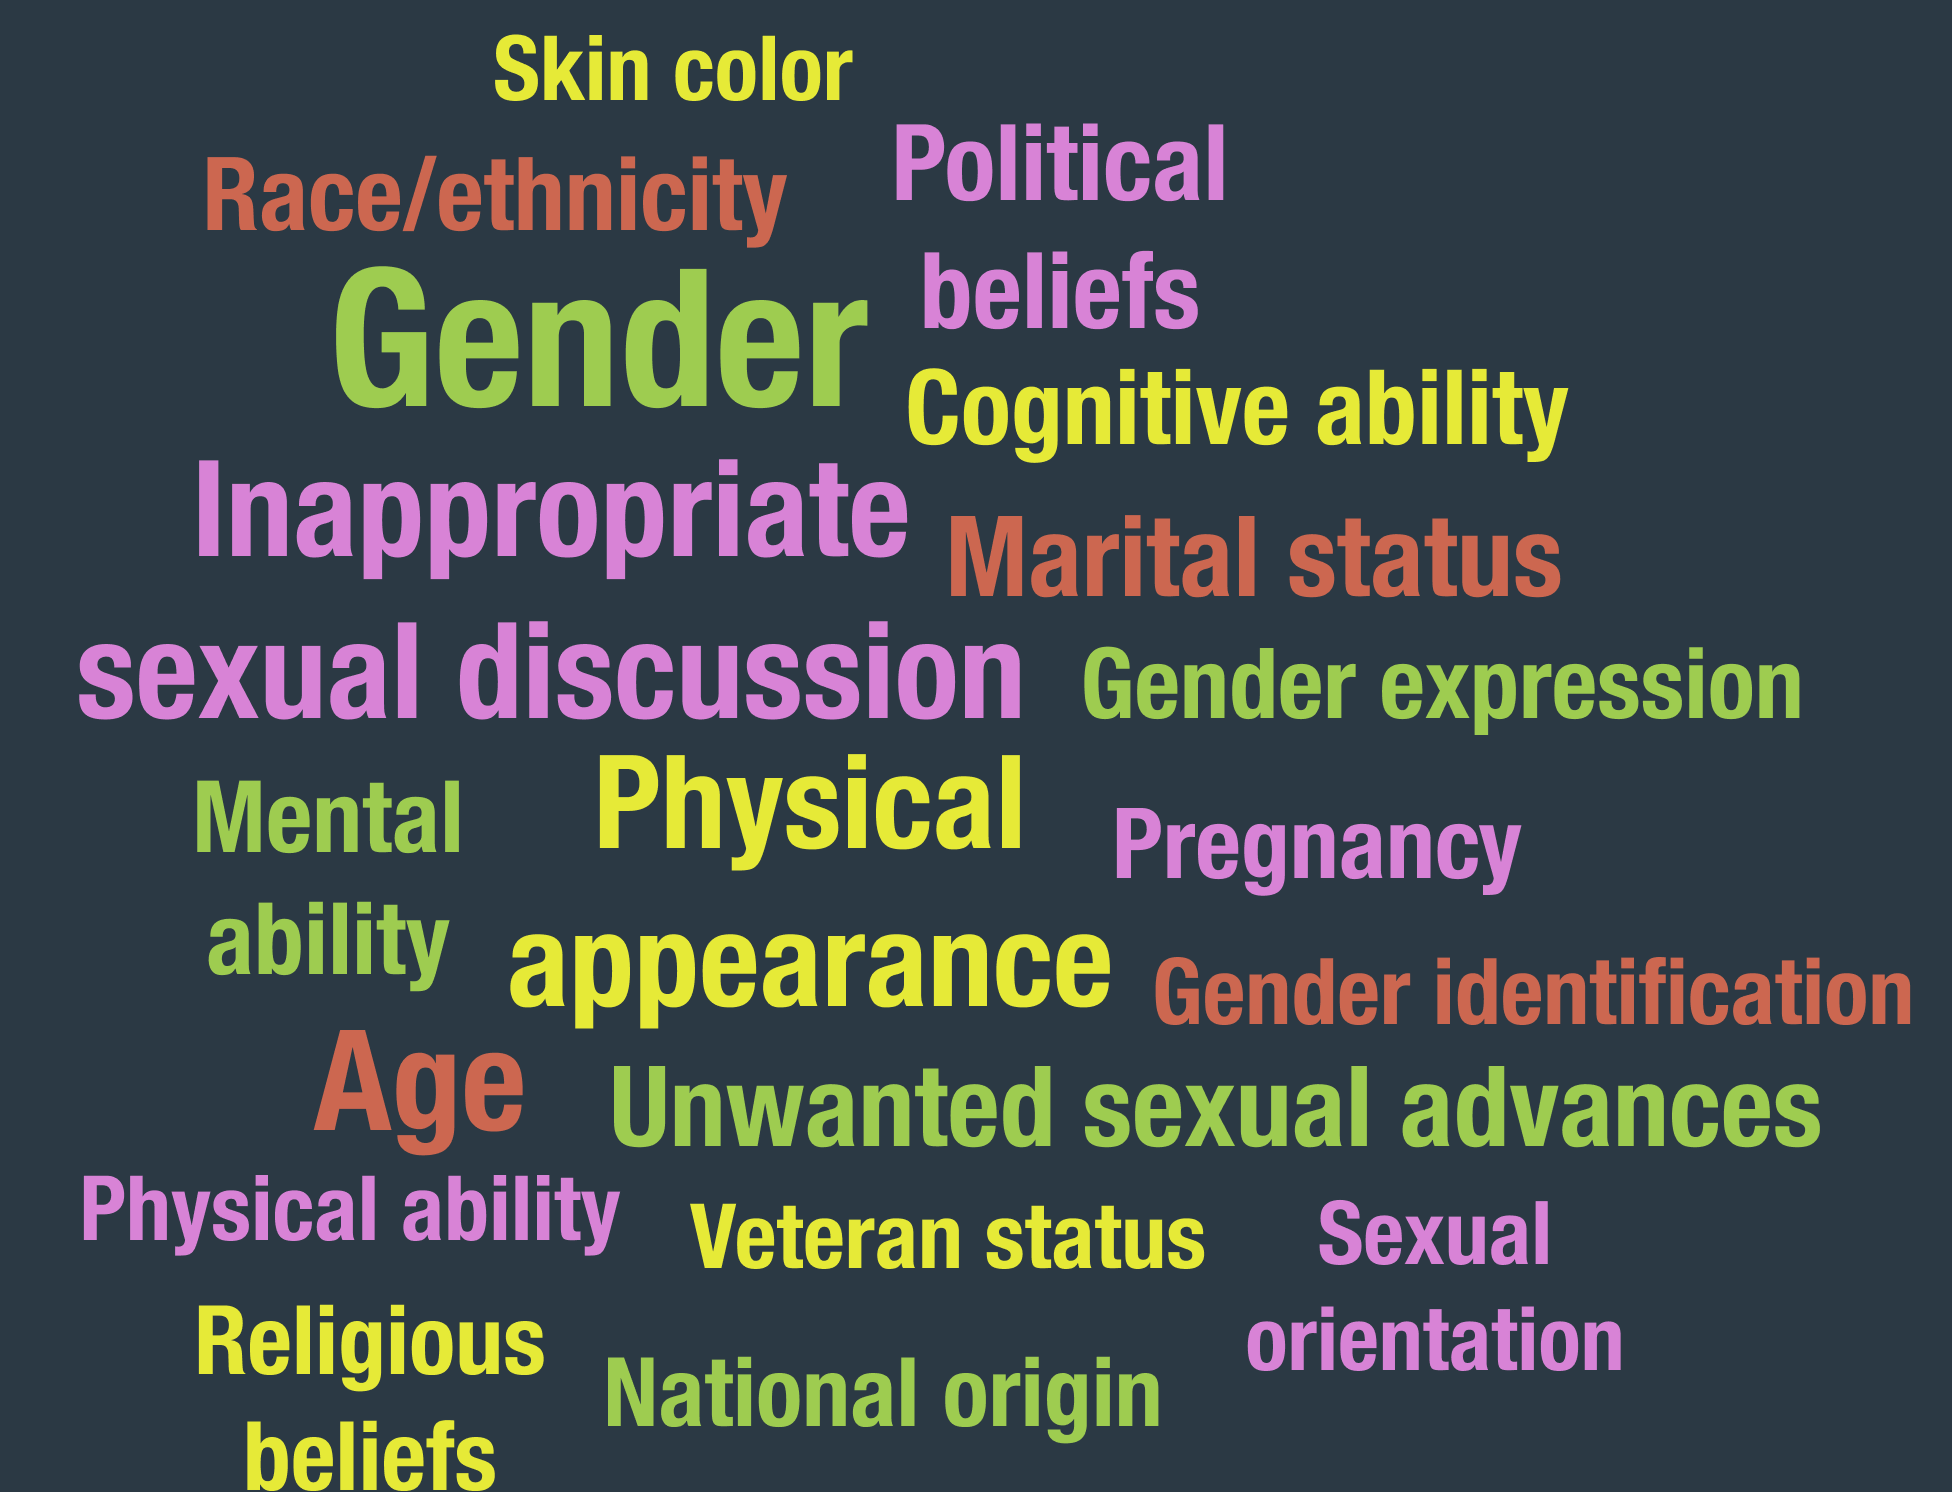 Skin Color, Race/ethnicity, Political beliefs, Gender, Cognitive ability, Inappropriate sexual discussion, Marital status, Gender expression, Mental ability, Physical appearance, Pregnancy, Age, Gender identification, Unwanted sexual advances, Physical ability, Veteran status, Sexual orientation, Religious beliefs, and National origin.